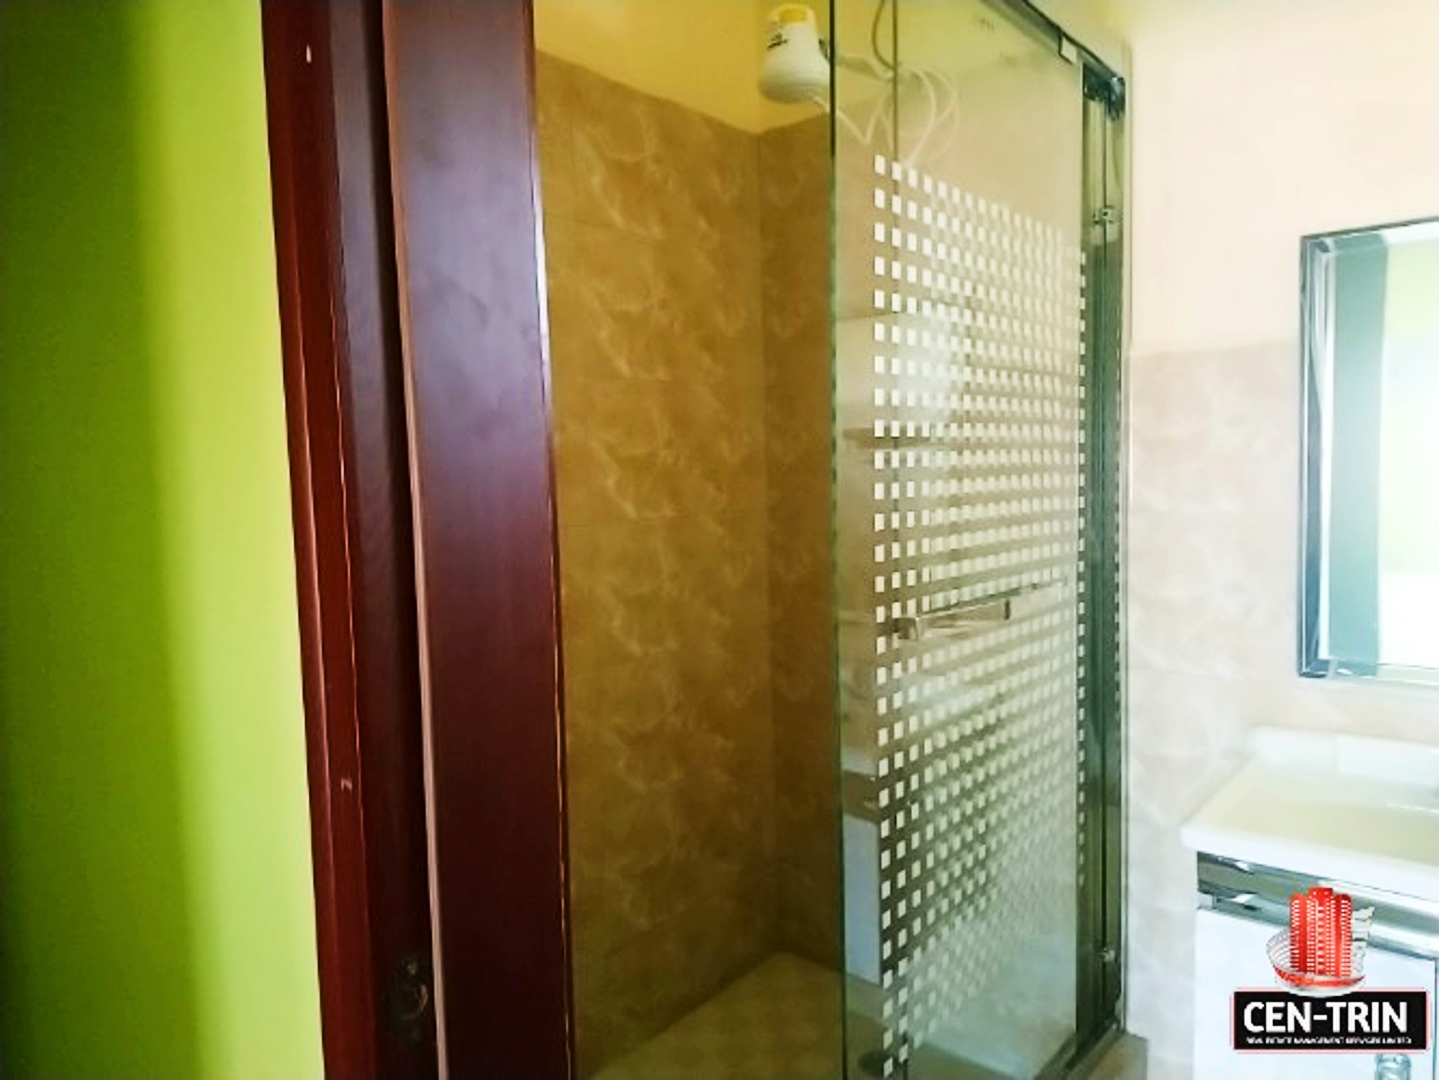 Affordable 2 Bedroom Apartments | A bathroom with a shower and sink in a two-bedroom apartment